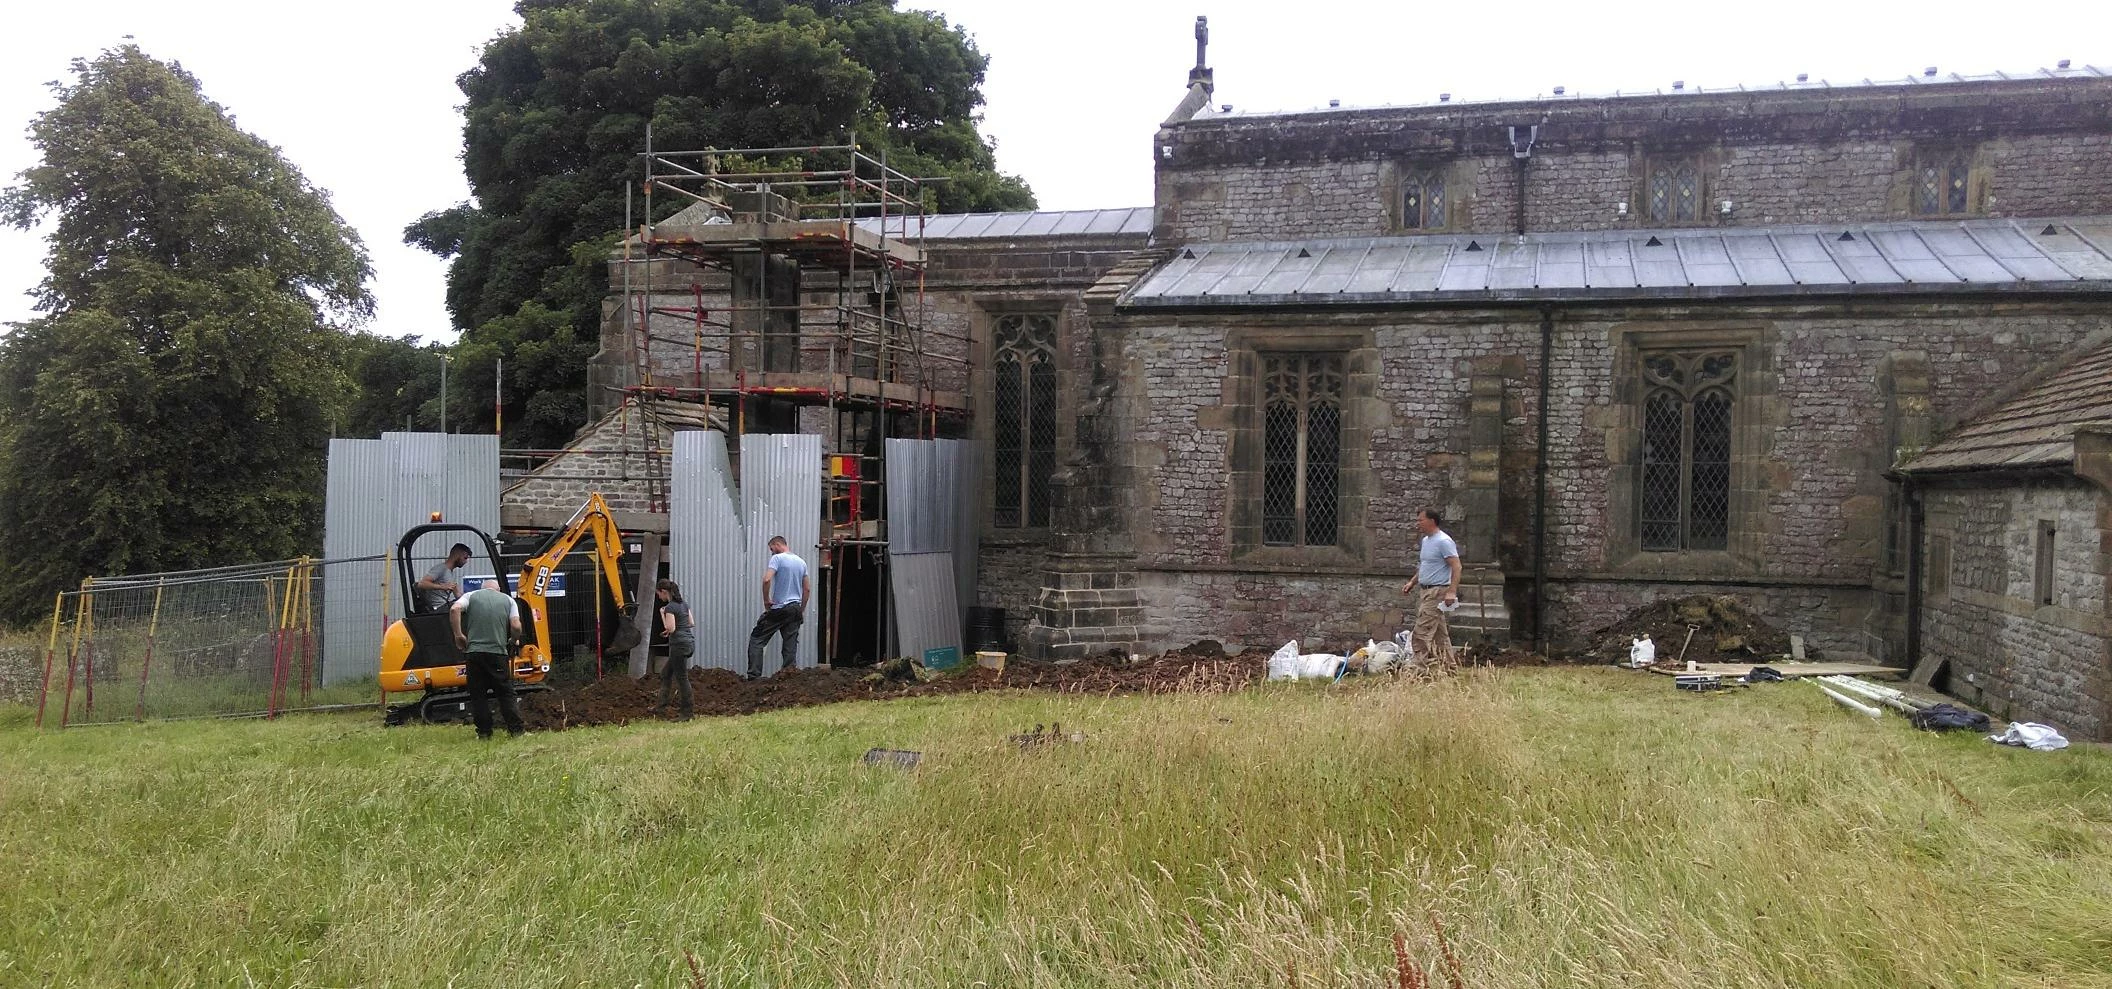 Martin-Brooks' heritage team prepares drainage channels at the grade I listed church in Taddington, 